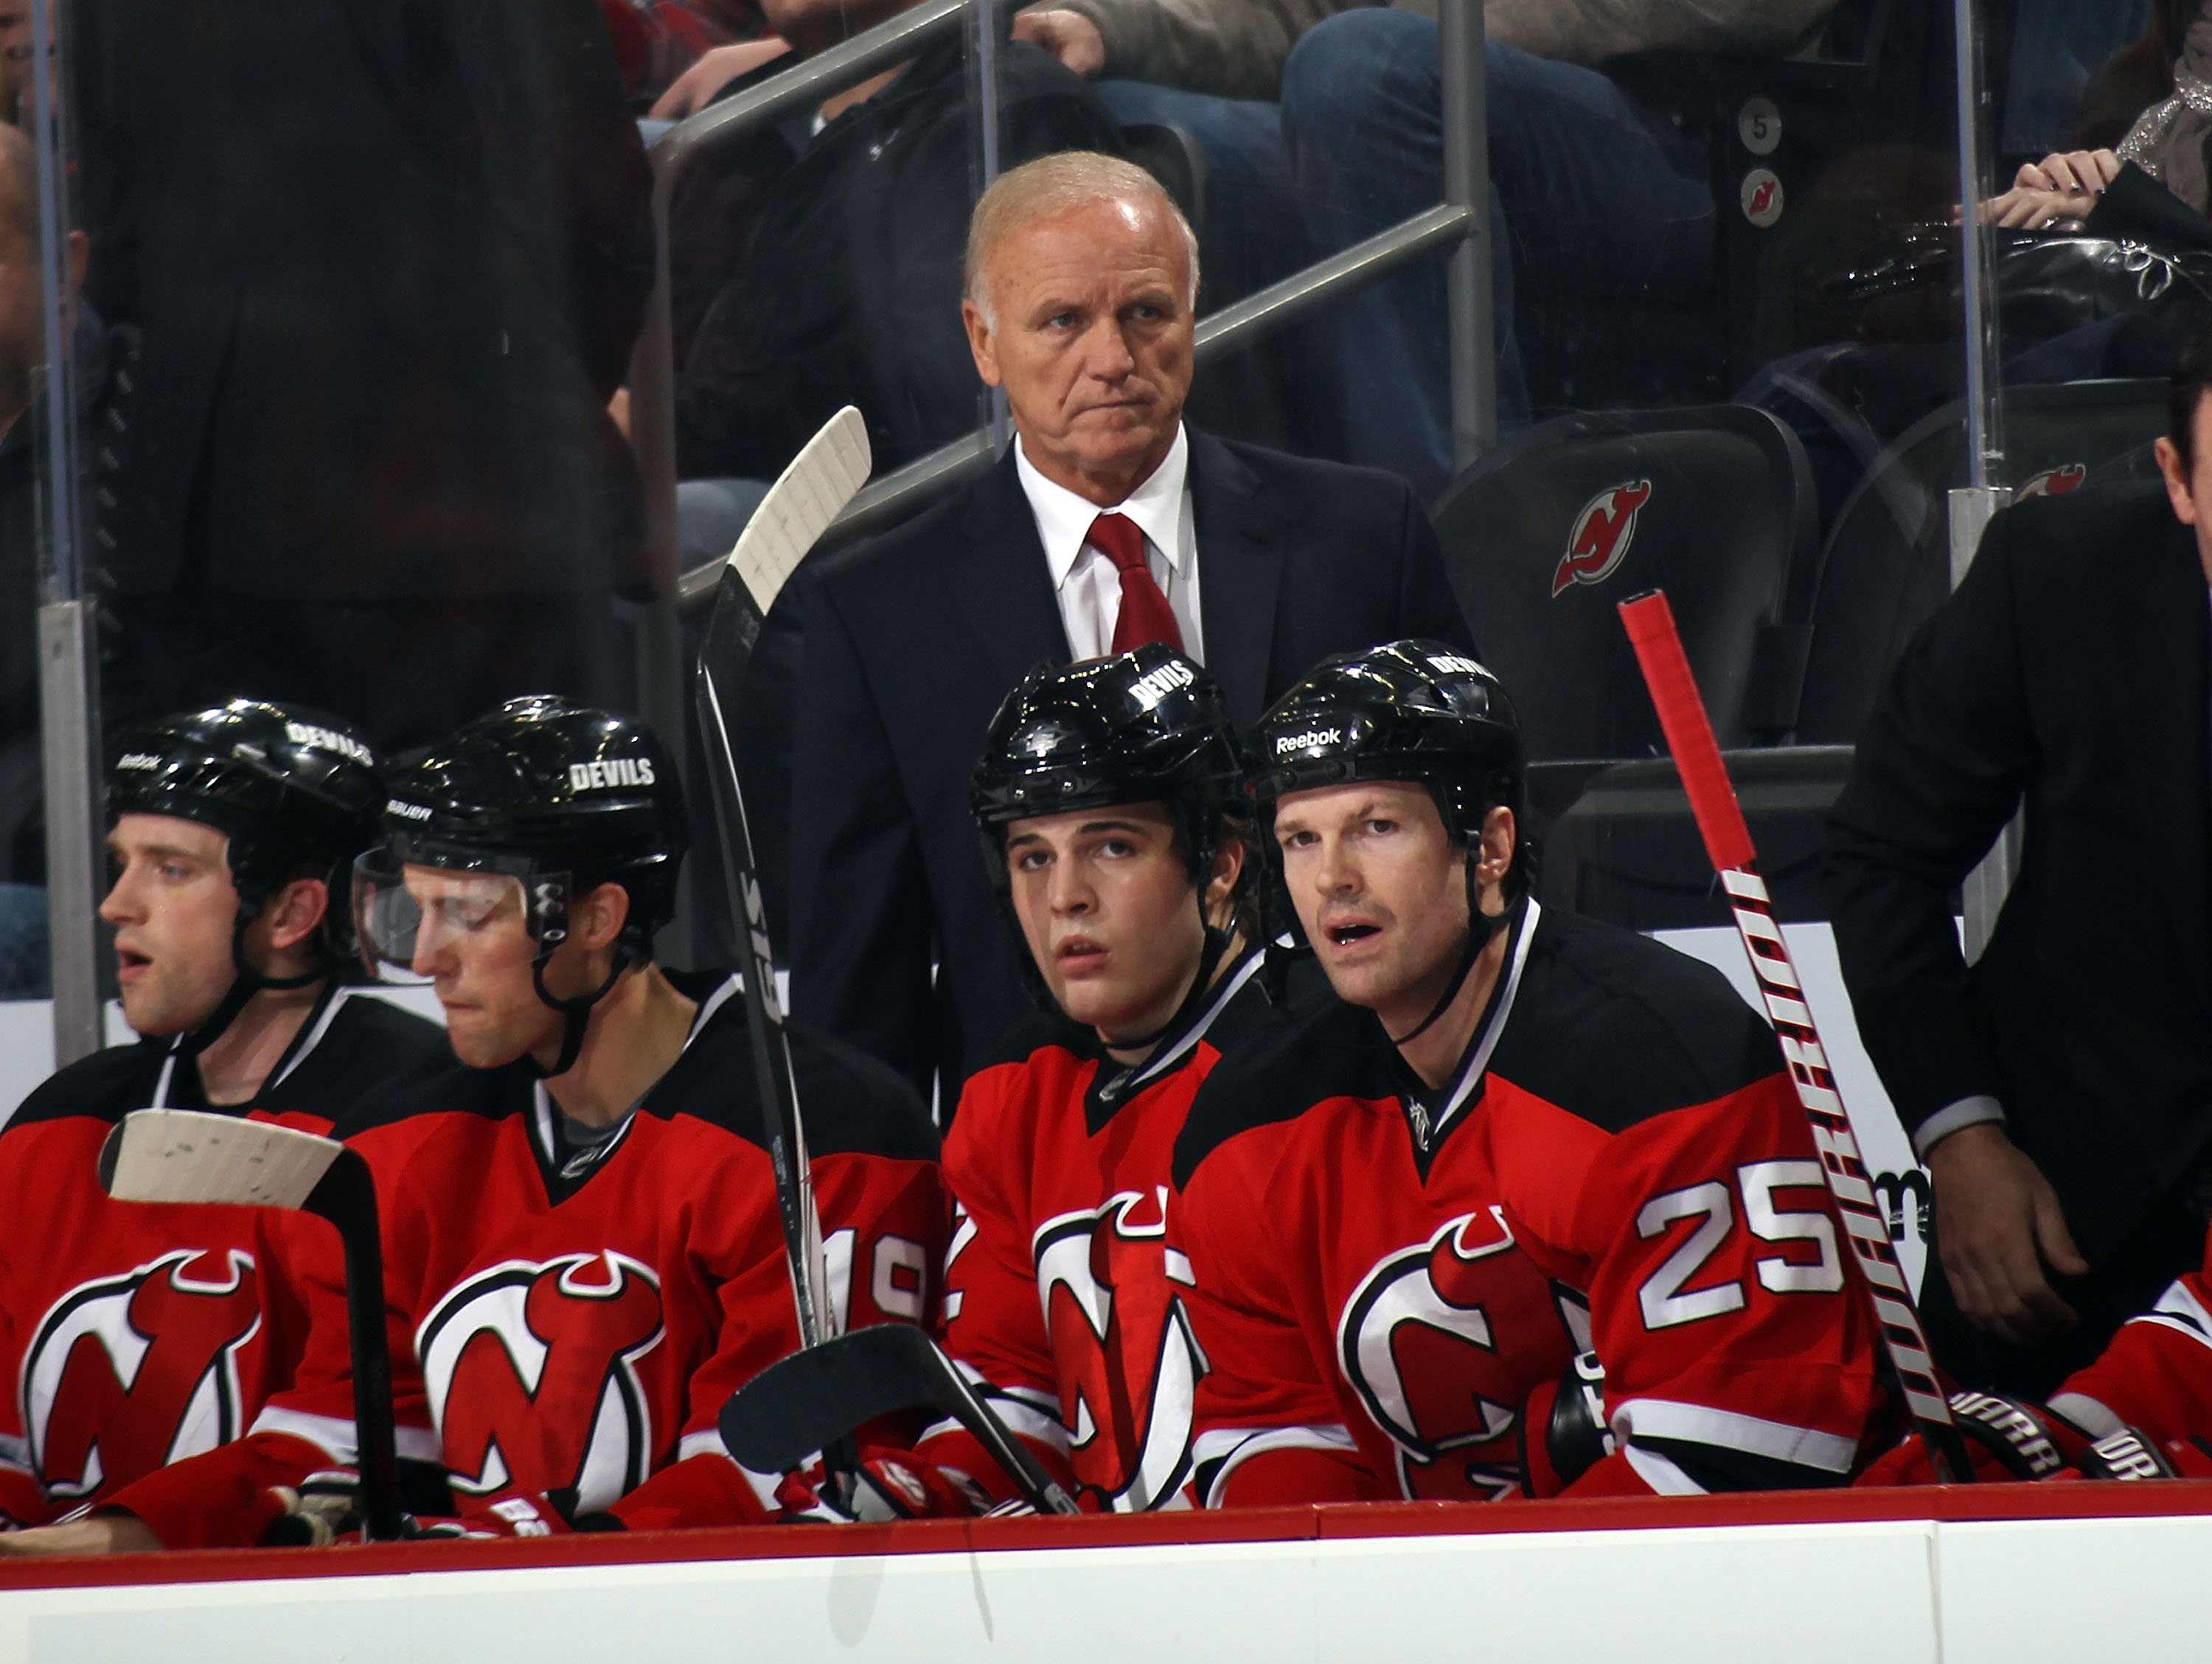 Why Your Team Sucks: New Jersey Devils, by LebronMaclean